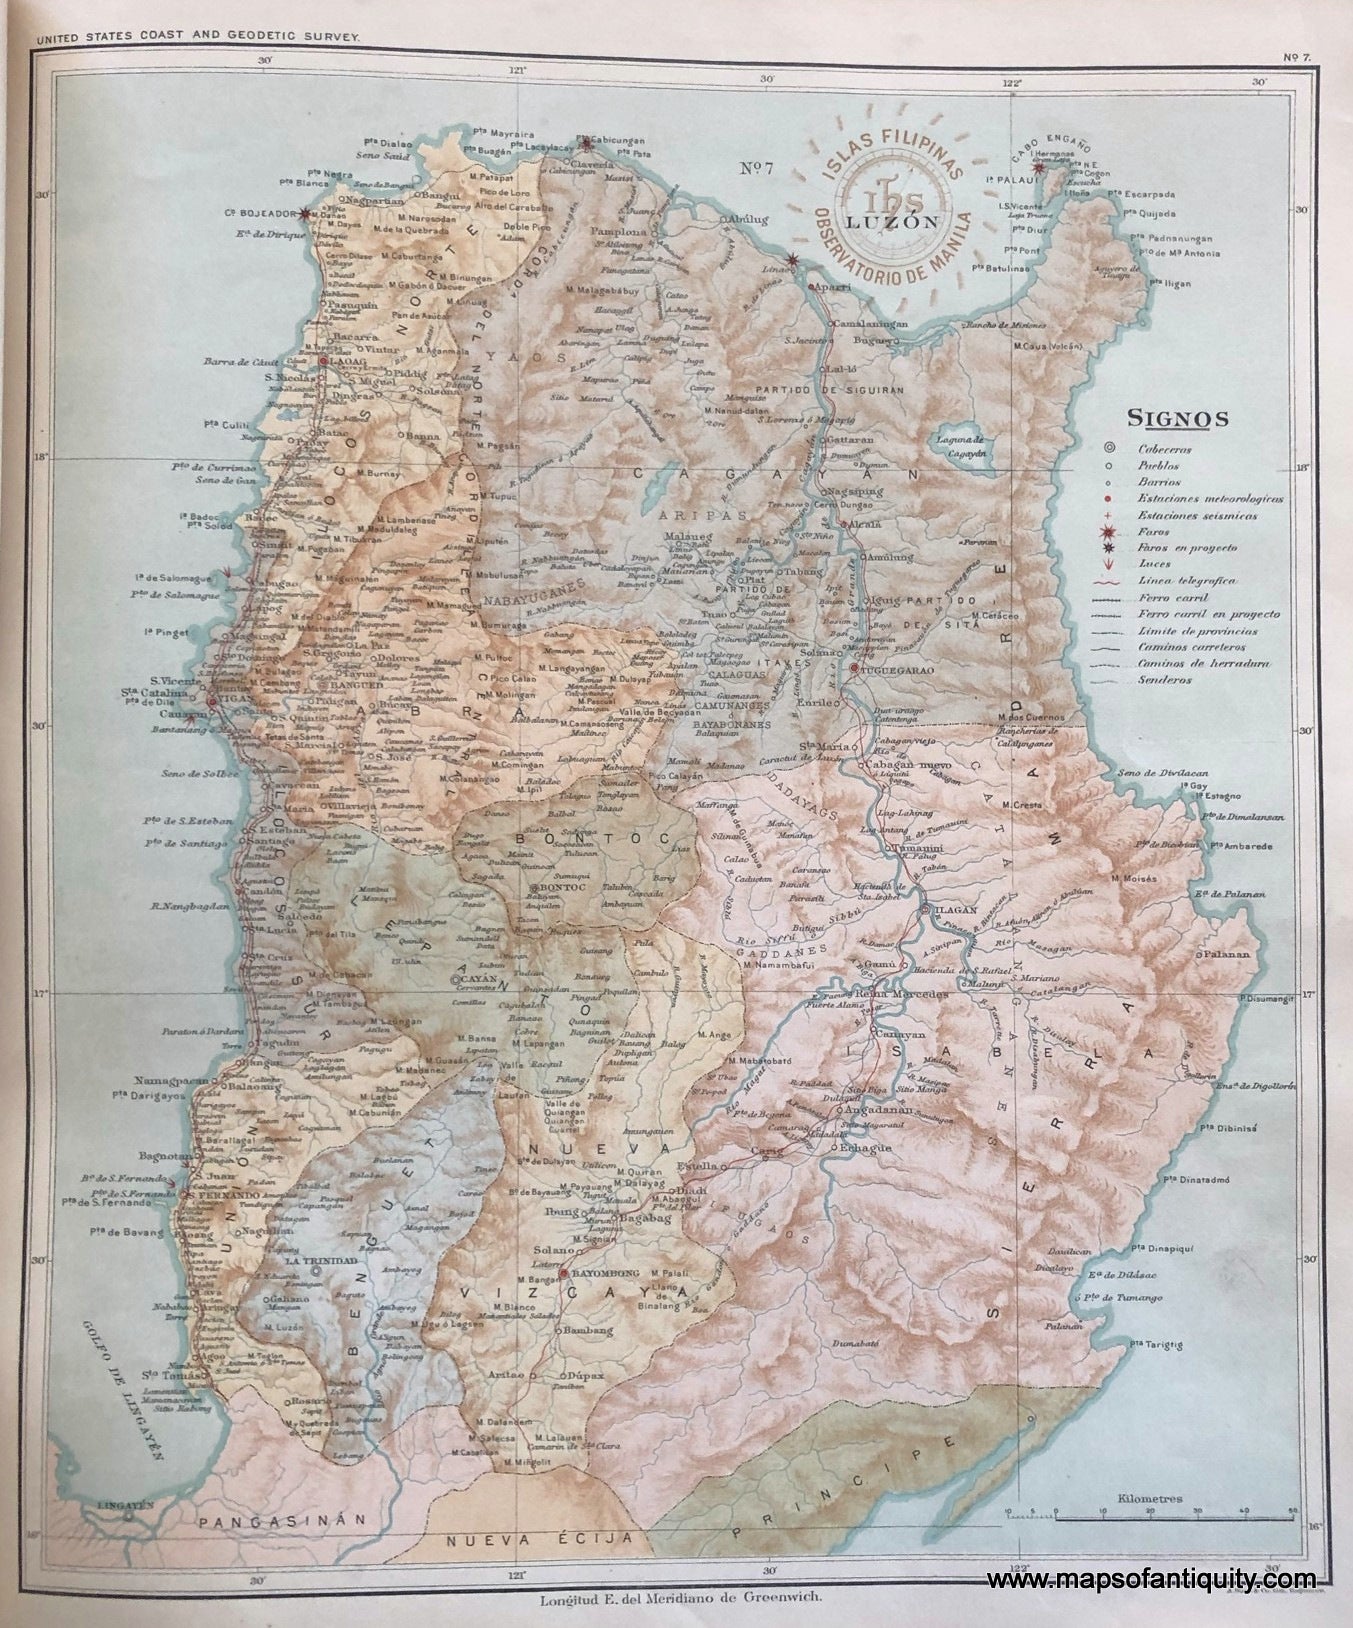 '-Northern-Luzon-in-the-Philippines-Map-No.-7-Asia-Southeast-Asia-&-Indonesia-1899-P.-Jose-Algue/USC&GS-Maps-Of-Antiquity-1800s-19th-century